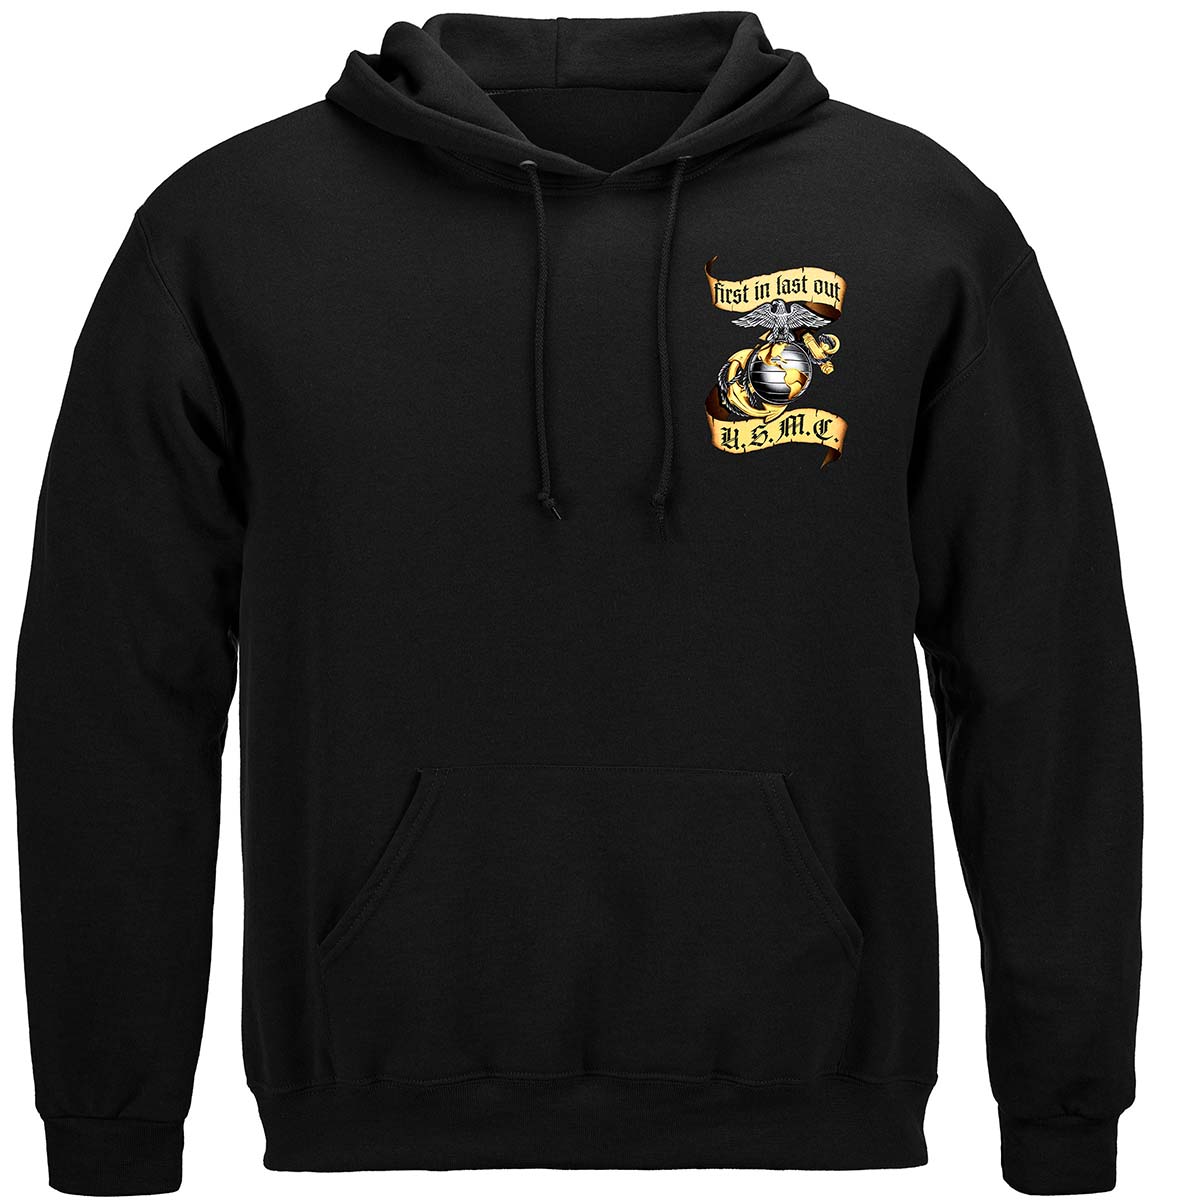 First In Last Out Marine Corps Premium Hooded Sweat Shirt